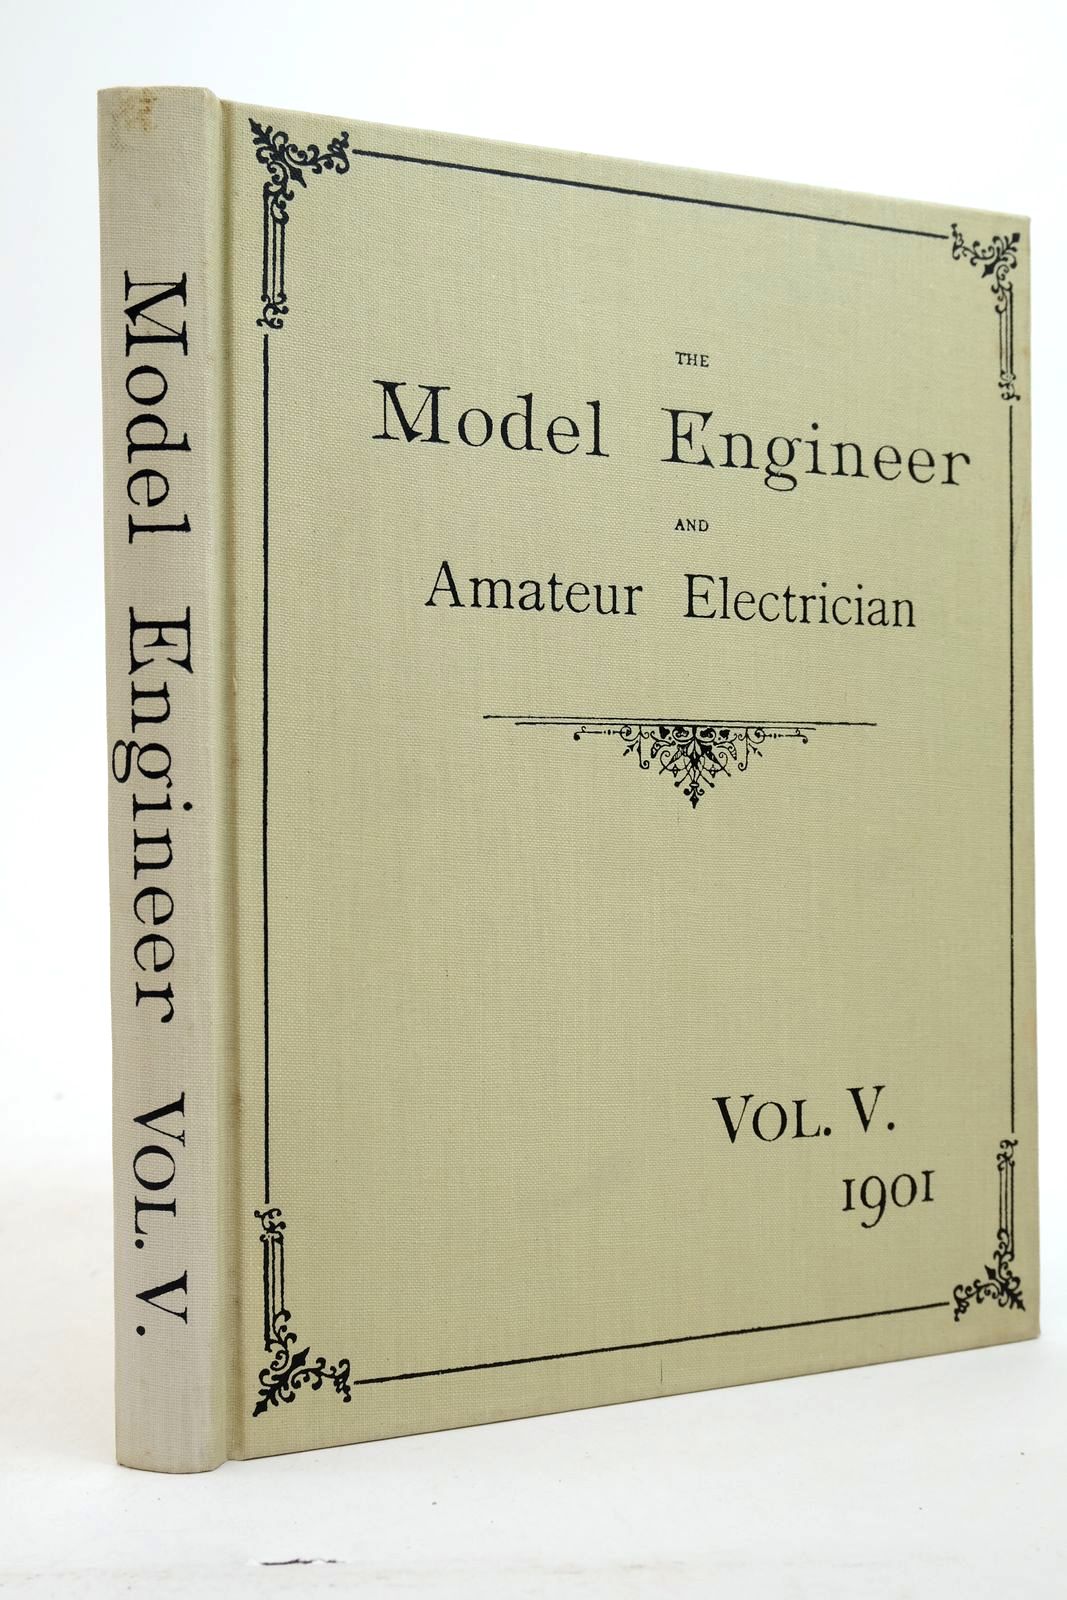 Photo of THE MODEL ENGINEER AND AMATEUR ELECTRICIAN VOL. V - 1901 written by Marshall, Percival published by Dawbarn &amp; Ward Limited, Argus Books Ltd (STOCK CODE: 2139858)  for sale by Stella & Rose's Books